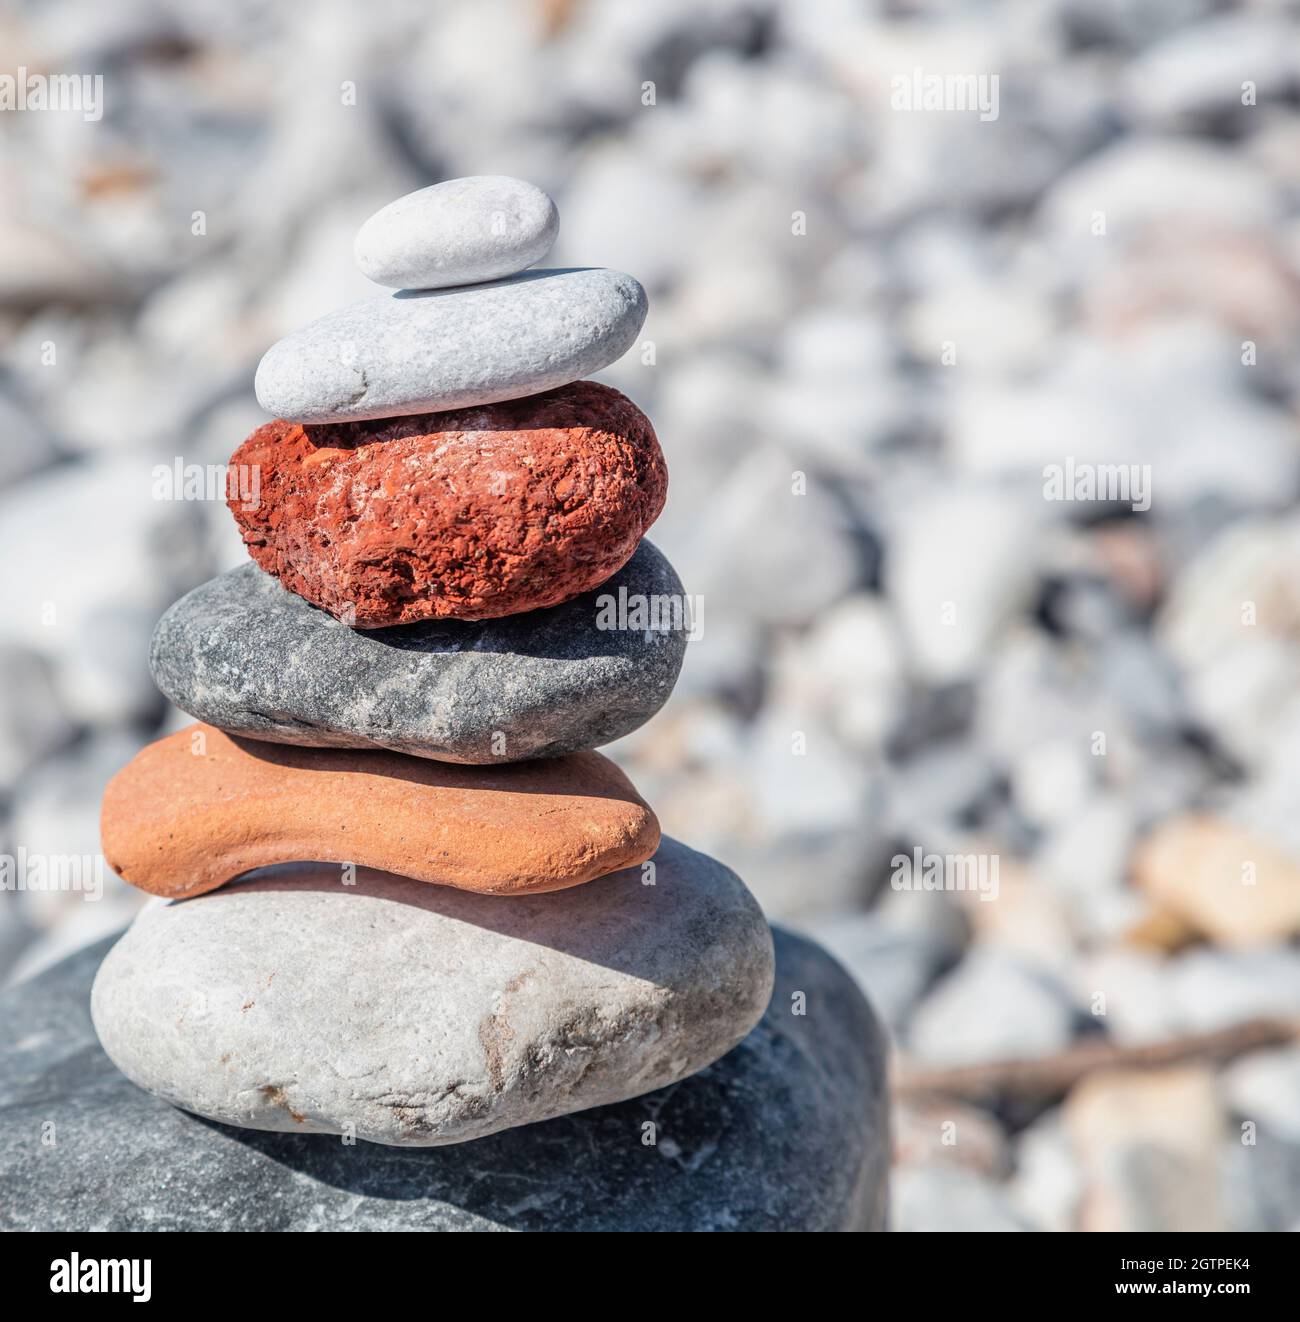 https://c8.alamy.com/comp/2GTPEK4/zen-balance-stones-smooth-rock-tower-stacked-on-pebble-beach-background-sunny-day-harmony-and-peace-concept-yoga-natural-therapy-2GTPEK4.jpg